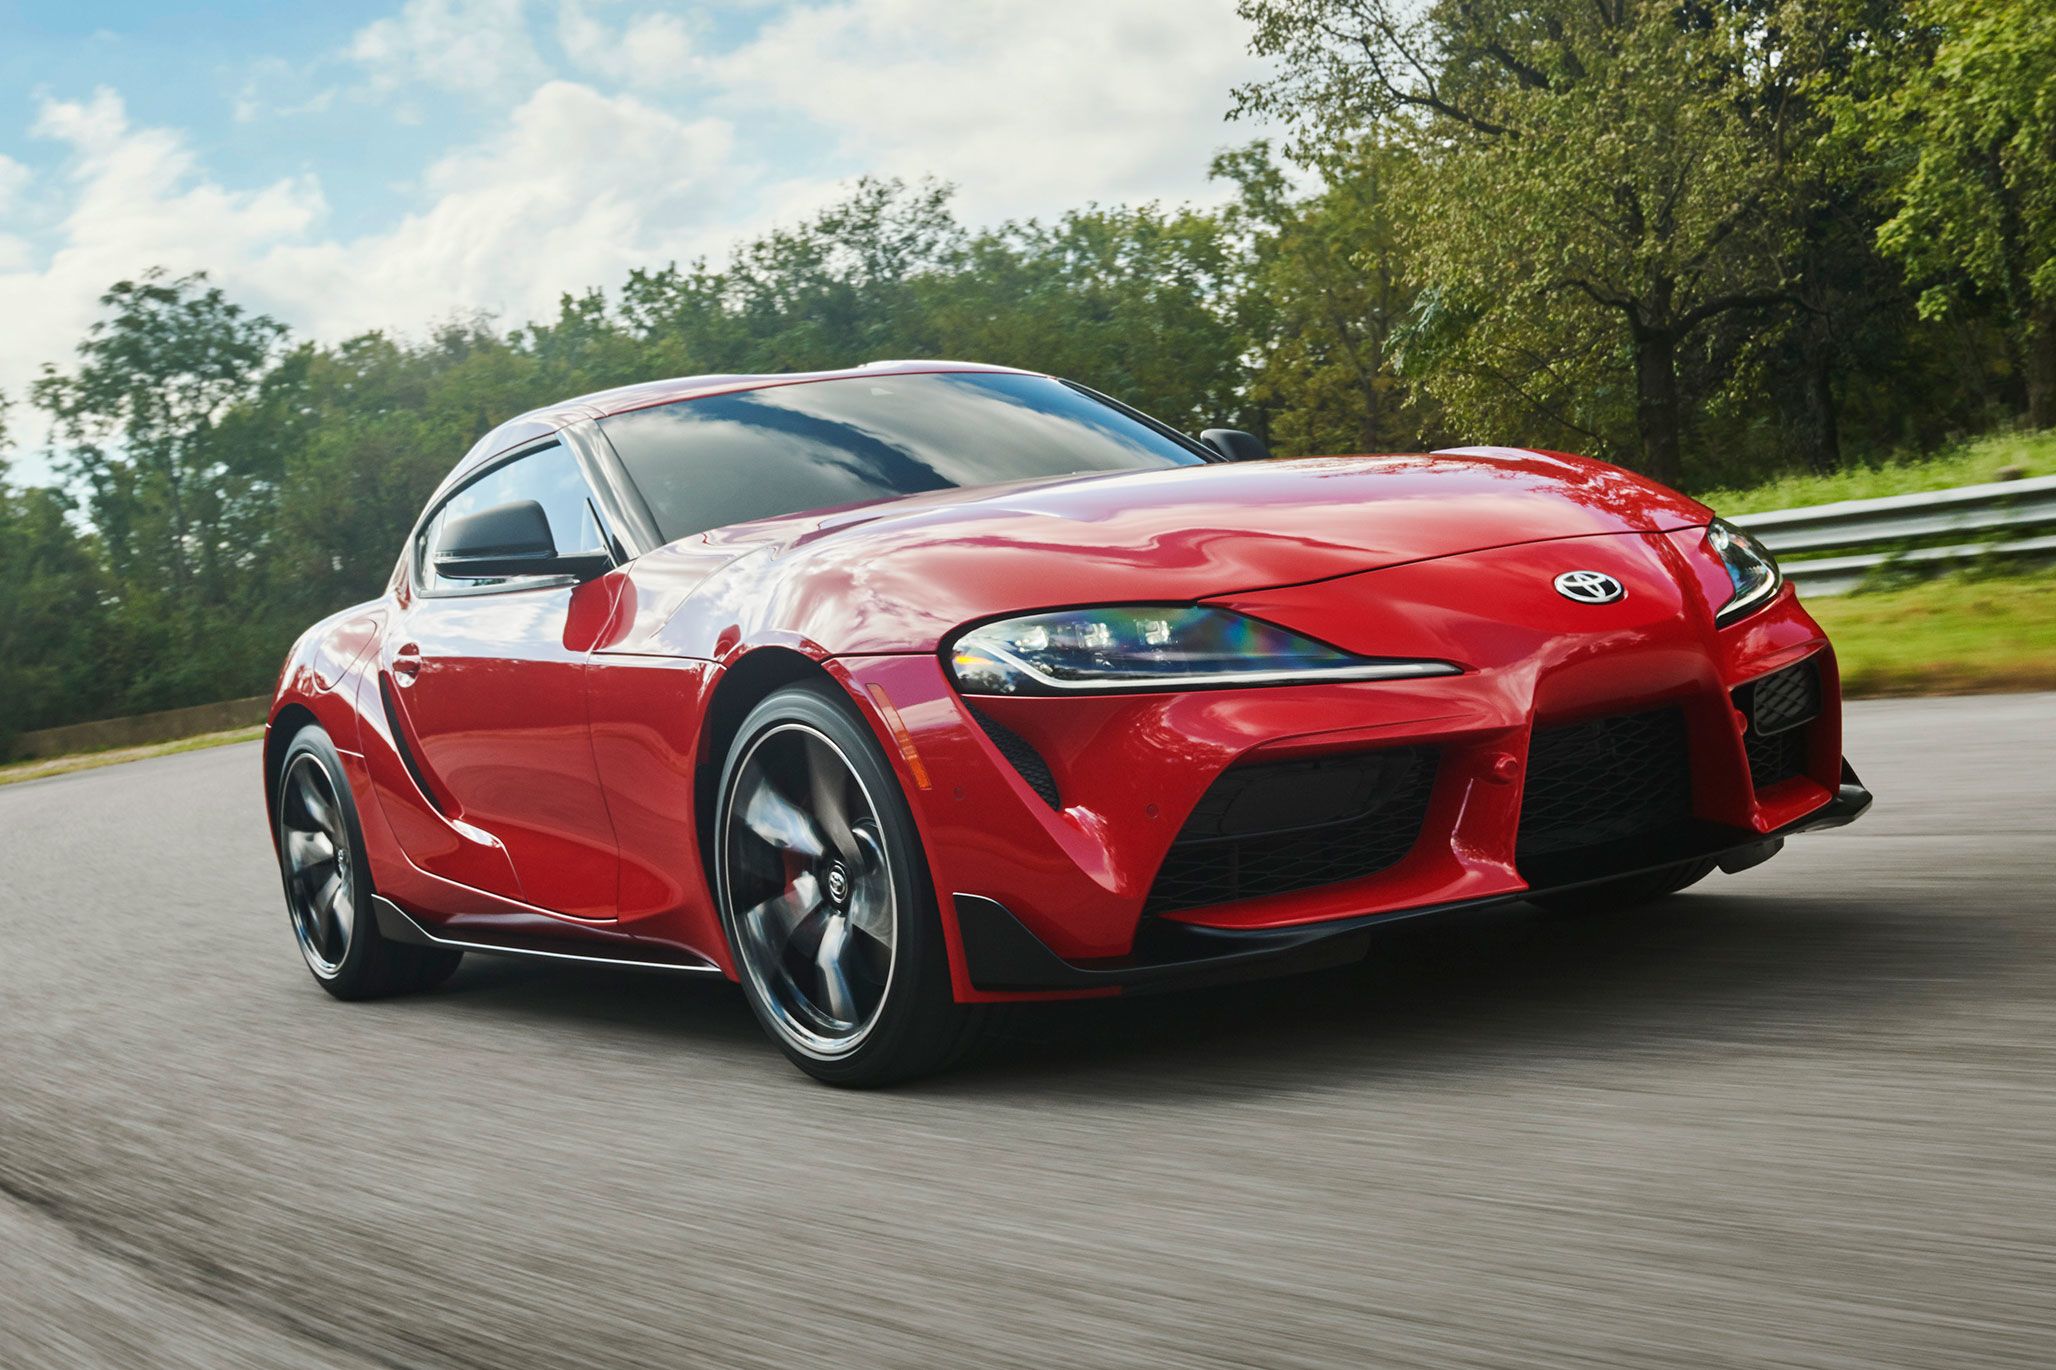 The 2020 Toyota Supra was worth the long wait